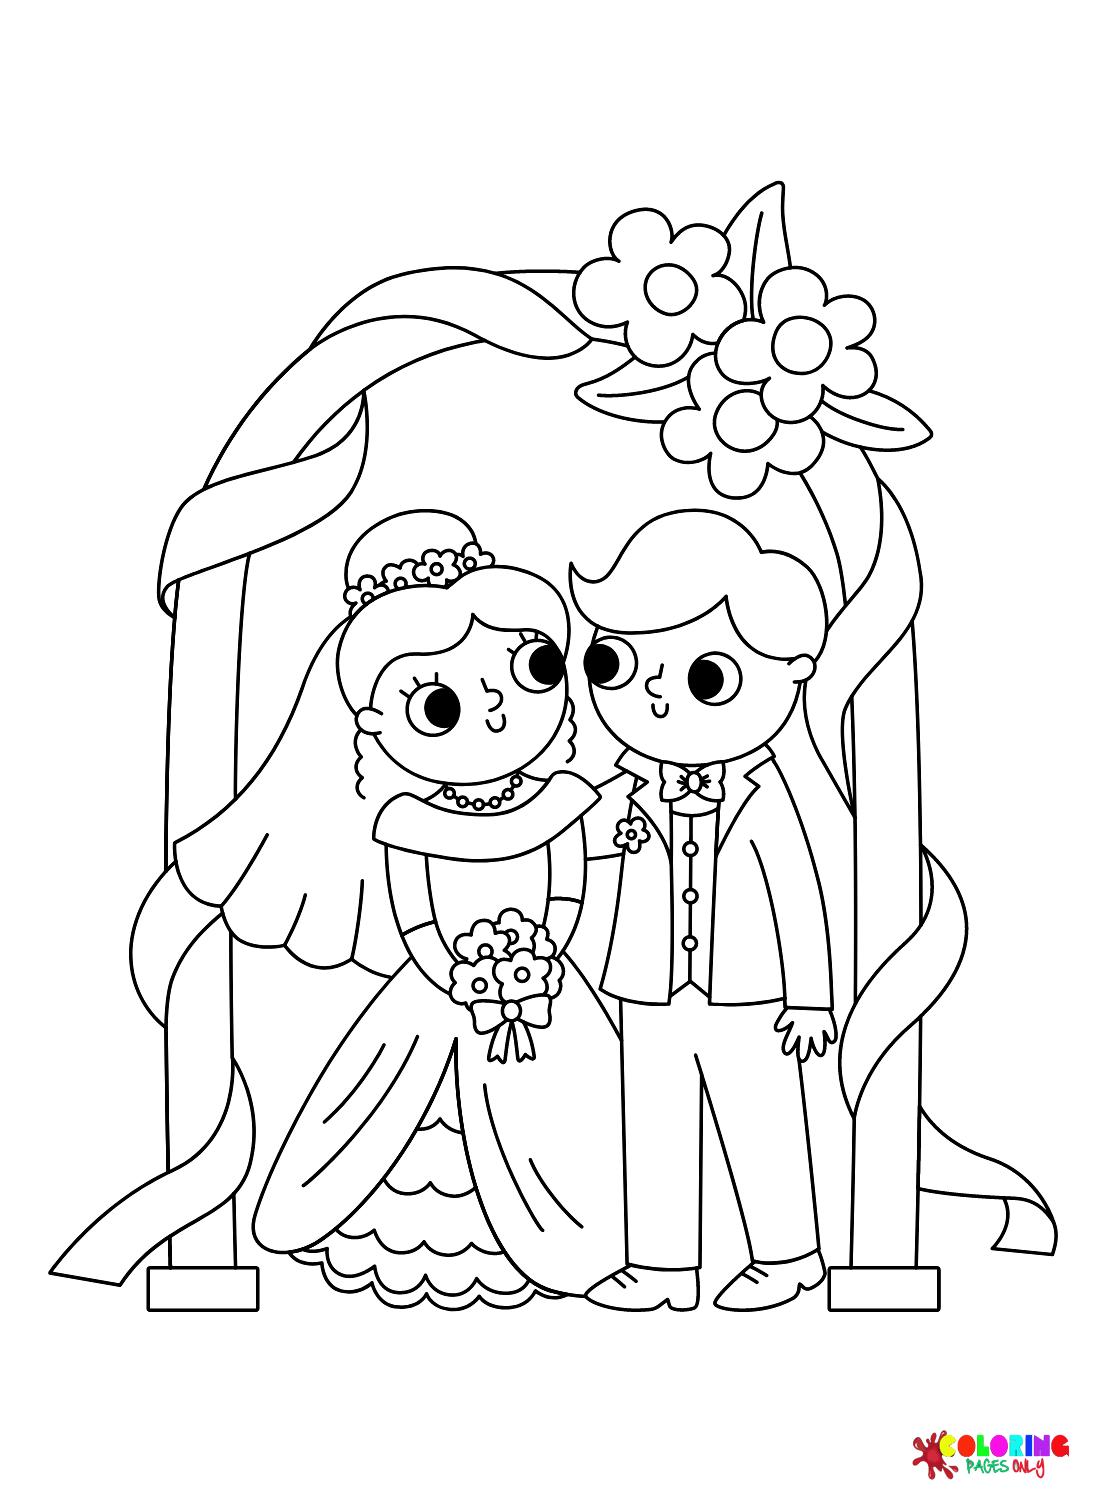 Pictures Bride and Groom Coloring Page